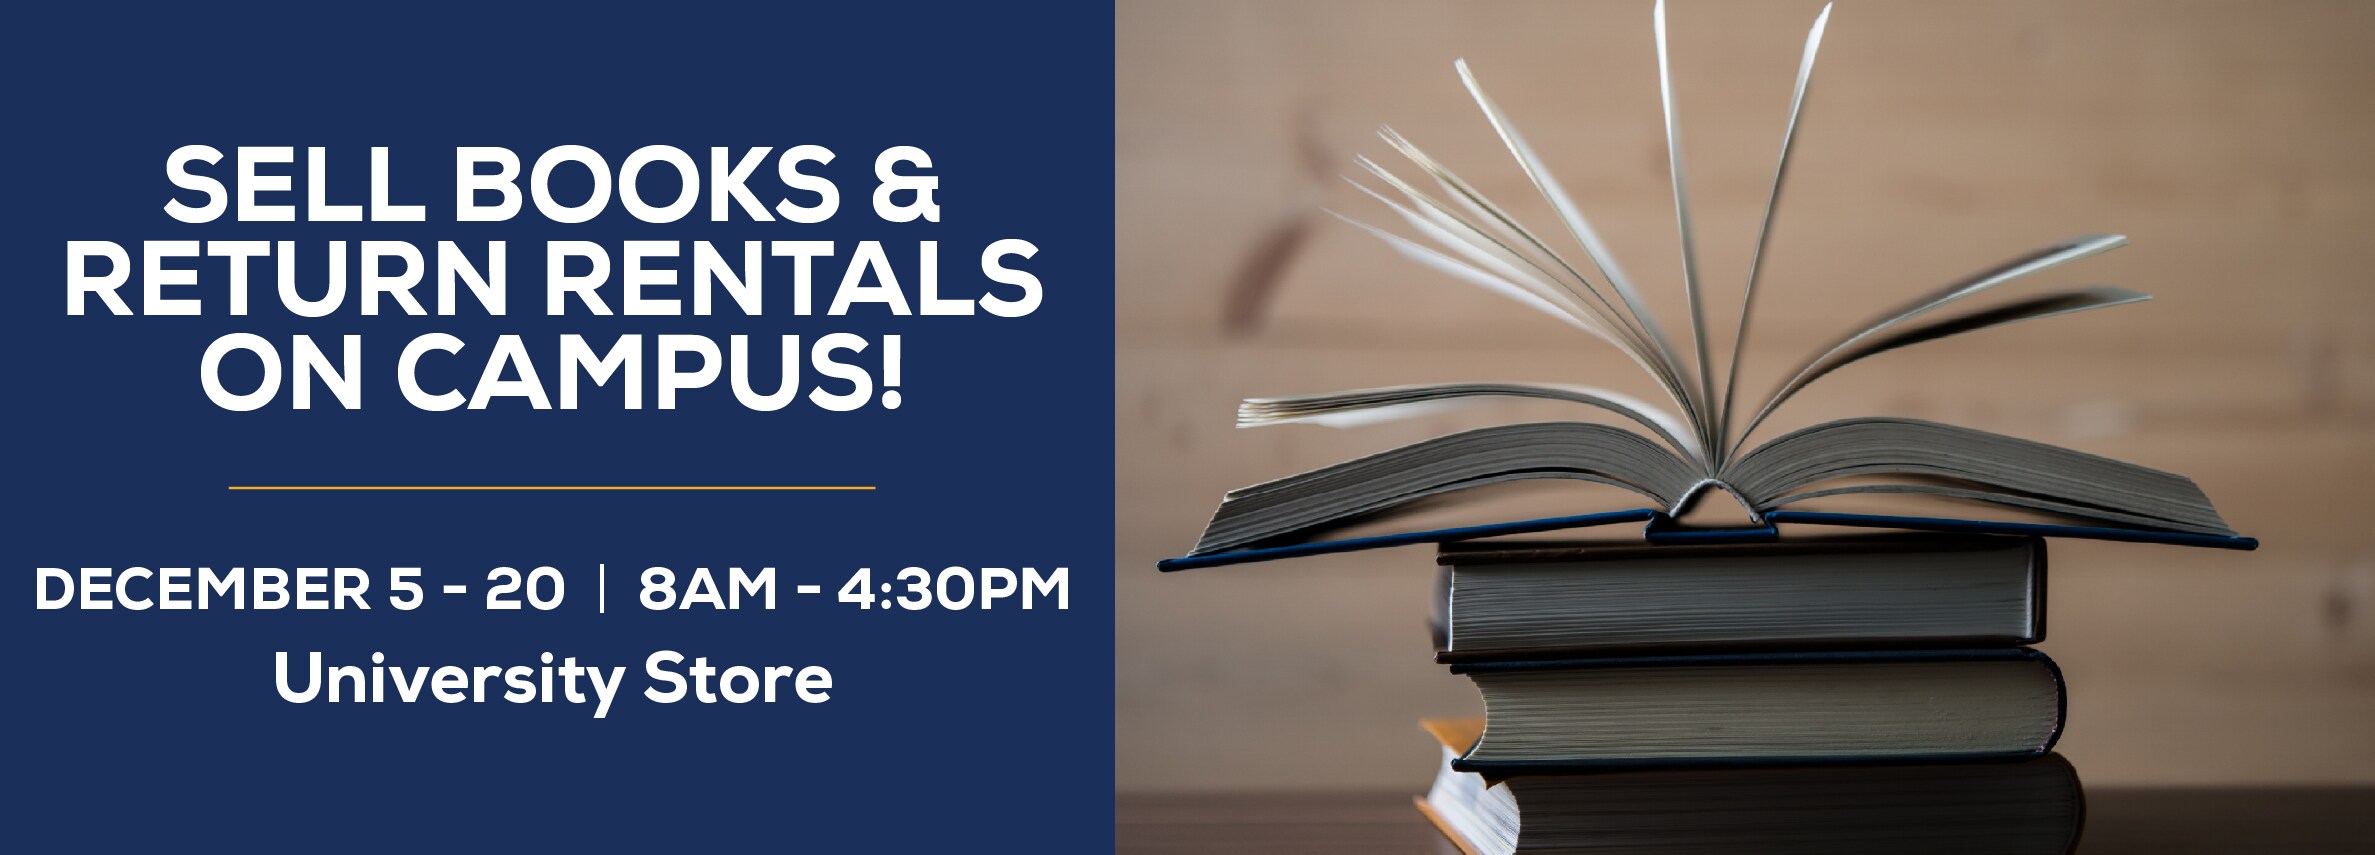 Sell your books and return your rentals on campus! December 5th through 20th. 8am to 4:30pm at the University Store. Not open on weekends